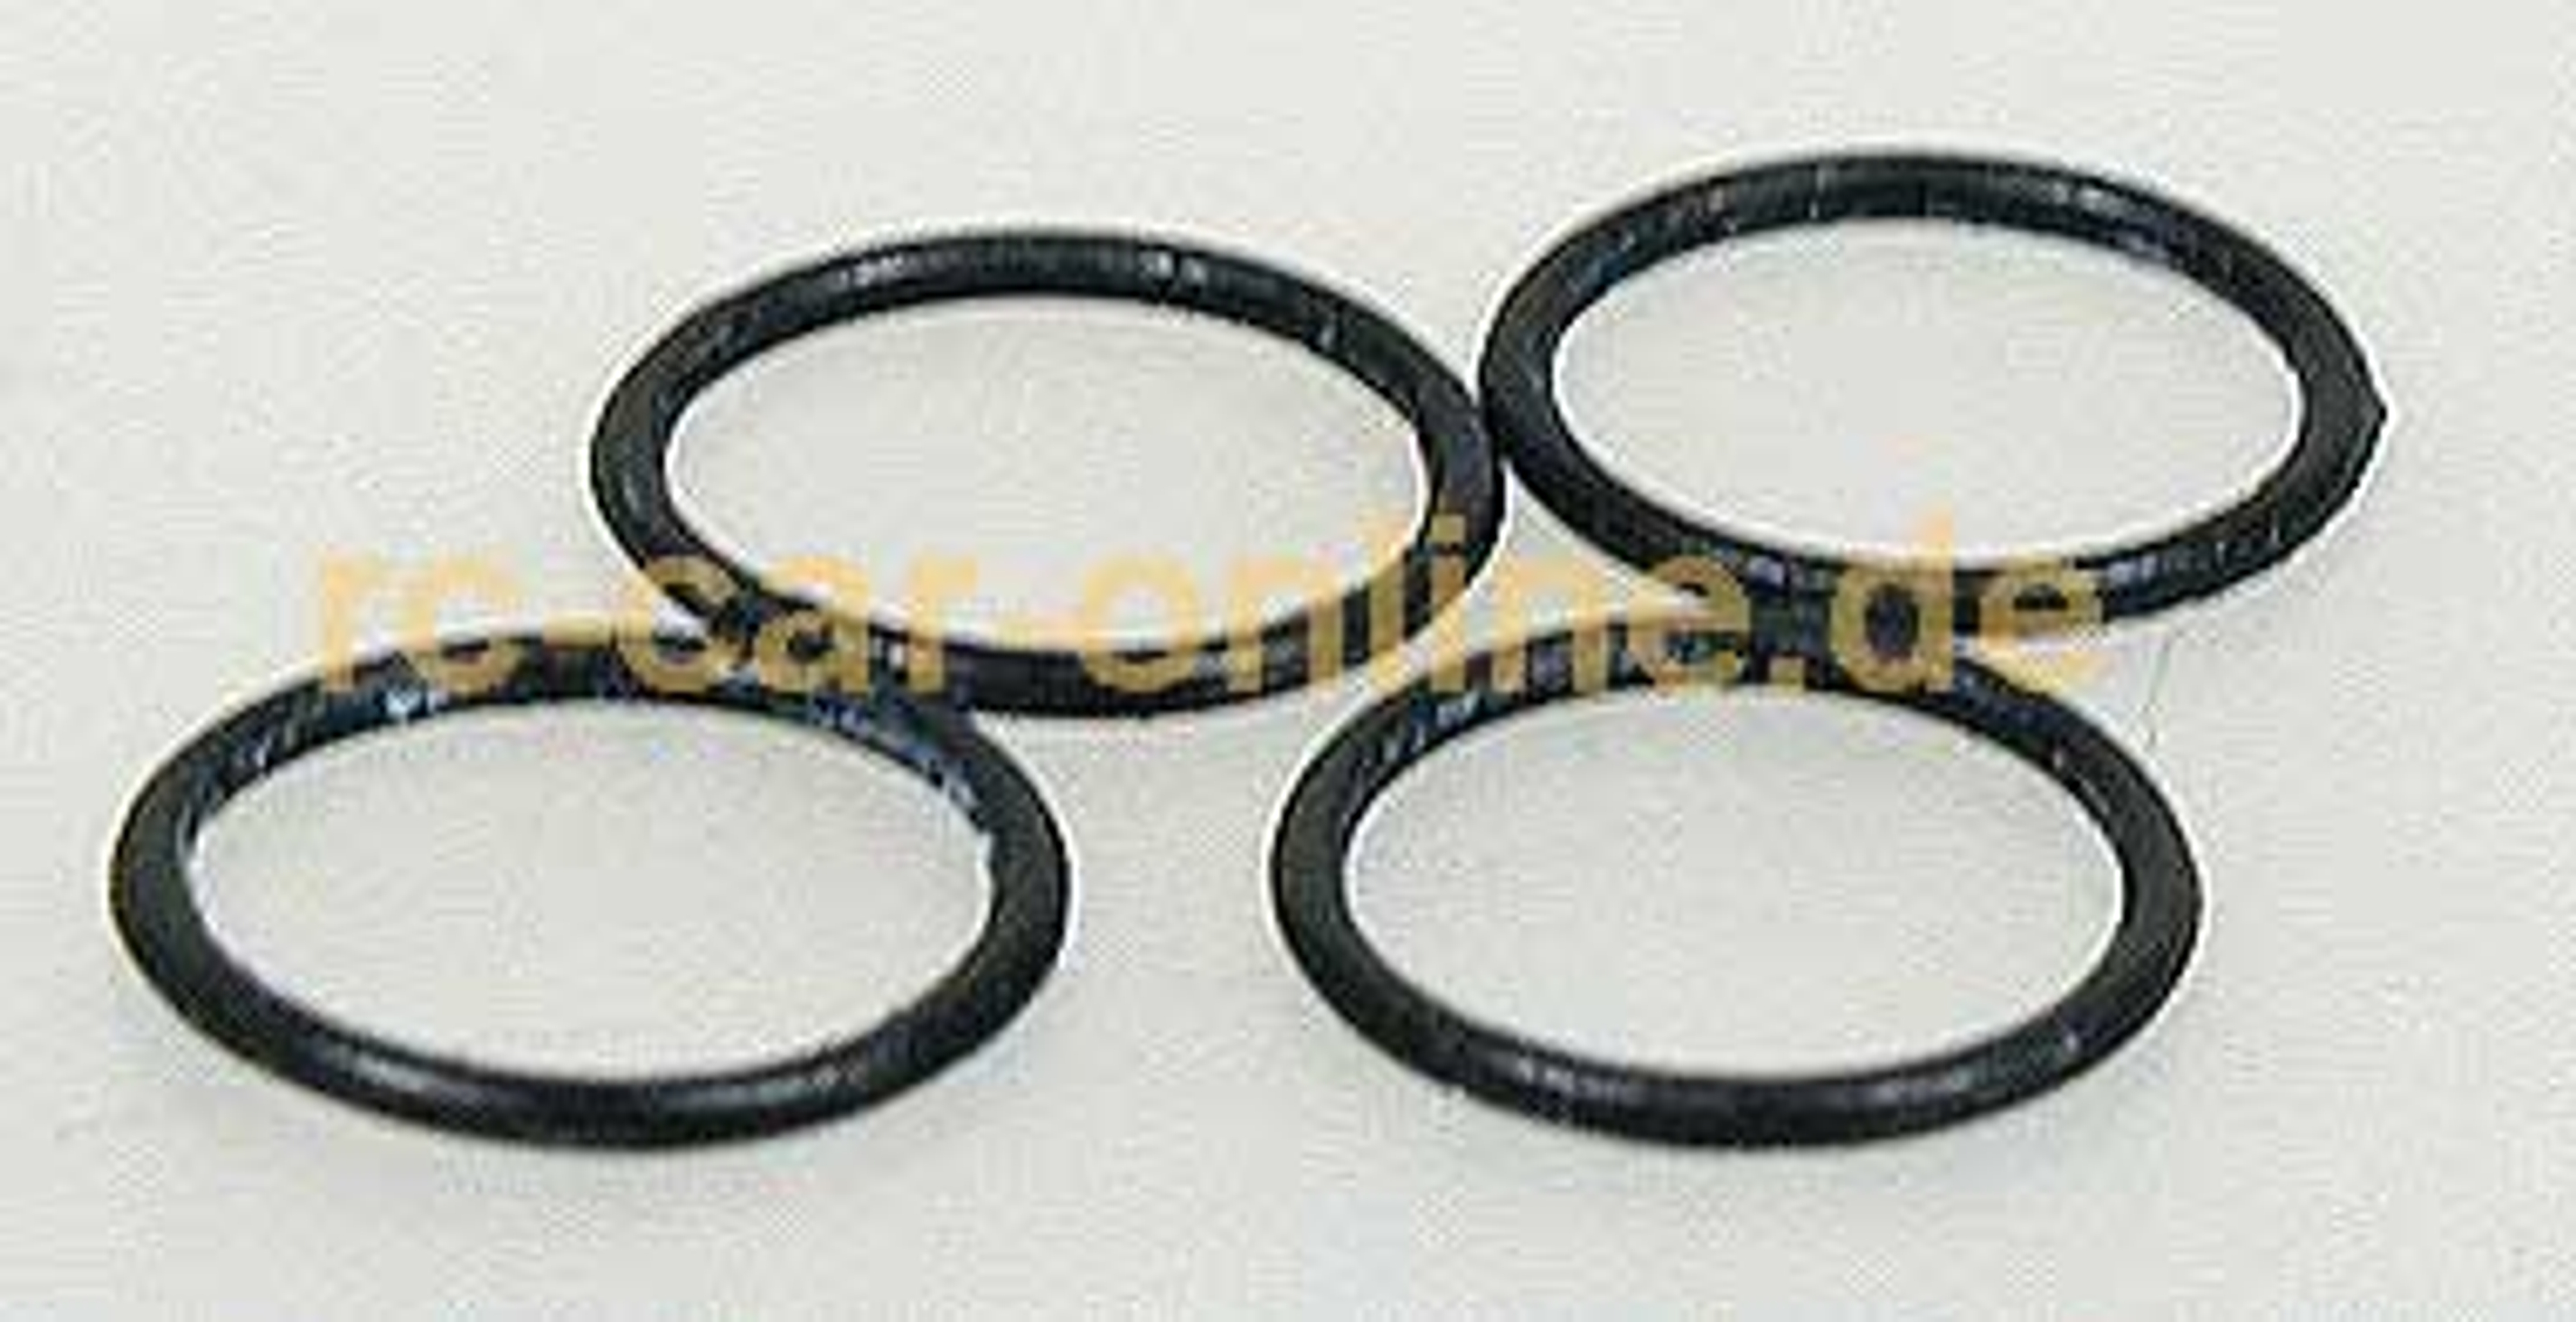 1000-36 Mecatech O-Ring, 4 St.